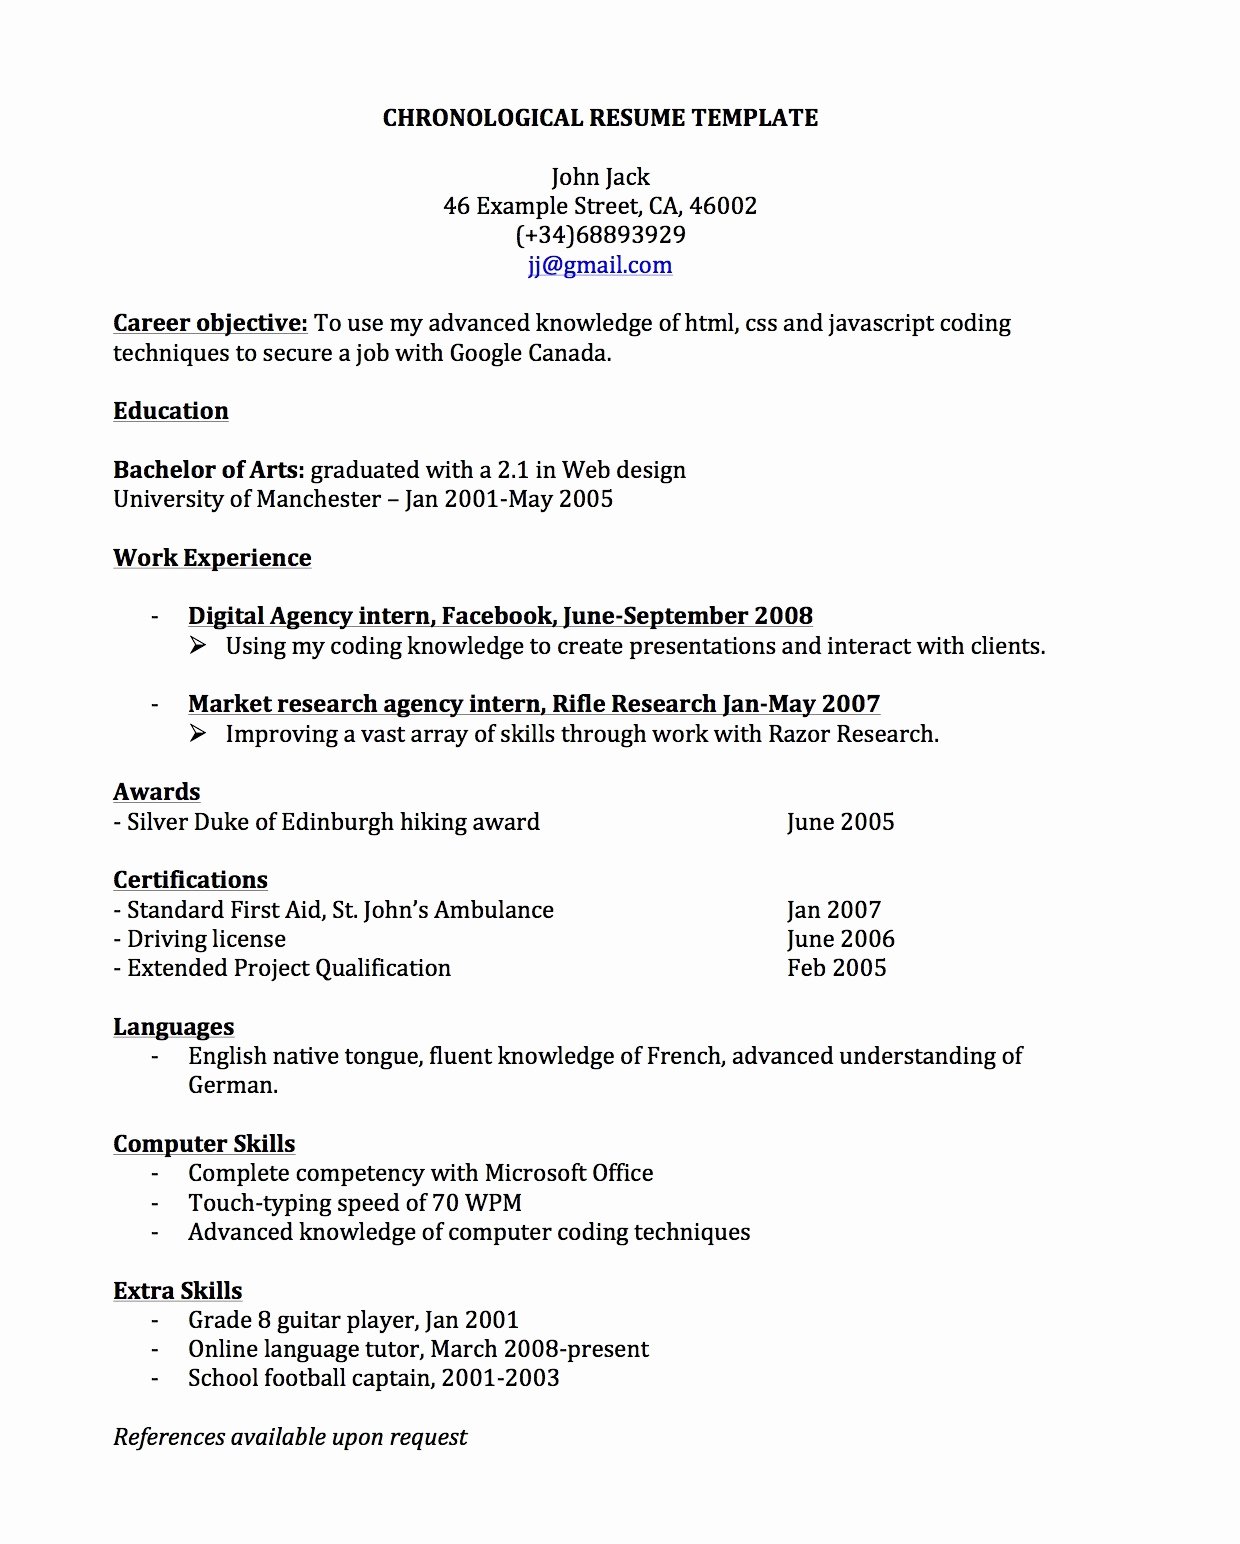 Chronological Resume for Canada